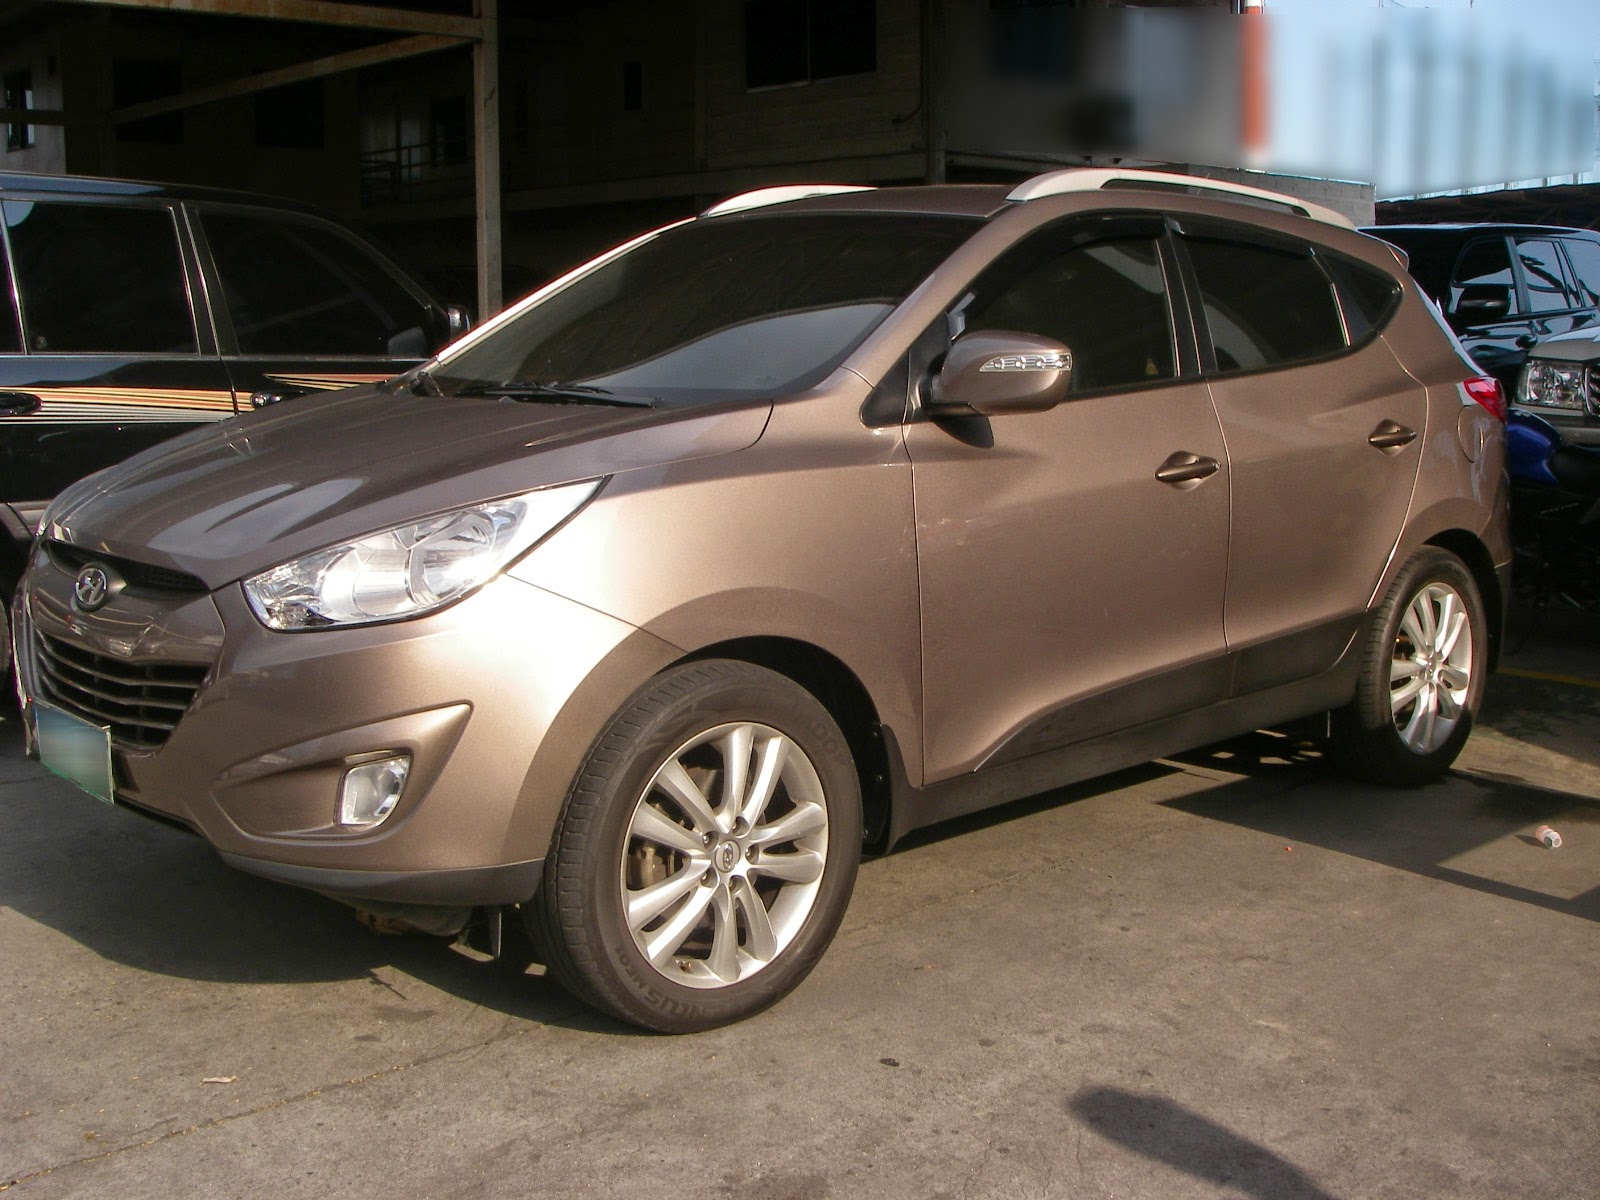 Cars For Sale in the Philippines: 2012 Hyundai Tucson 4x4 CRDi Automatic